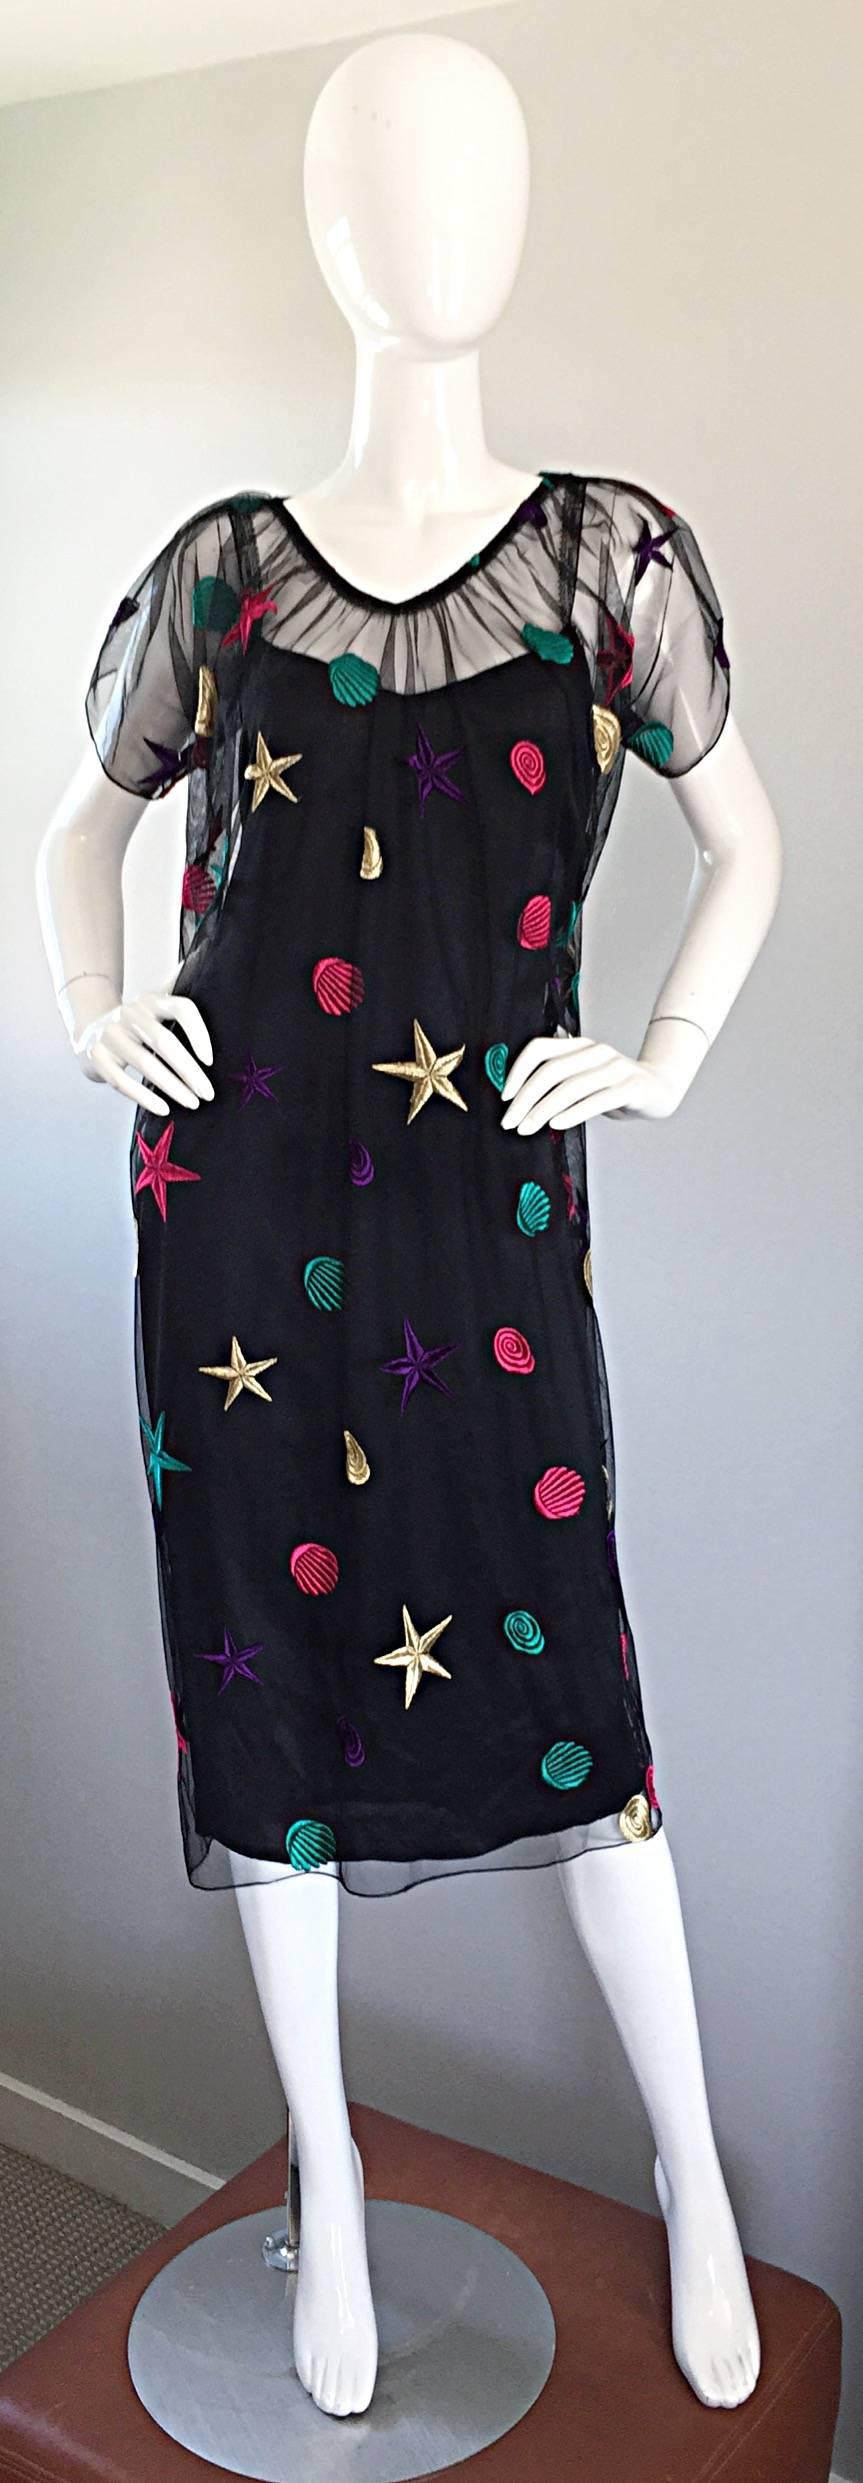 Rare vintage HOLLY'S HARP silk dress and silk mesh overlay! Features a plain black silk slip dress with lace sleeve straps that spell out Holly's Harp. Incredible black silk mesh overlay features embroidered stars and seashells in green, purple,